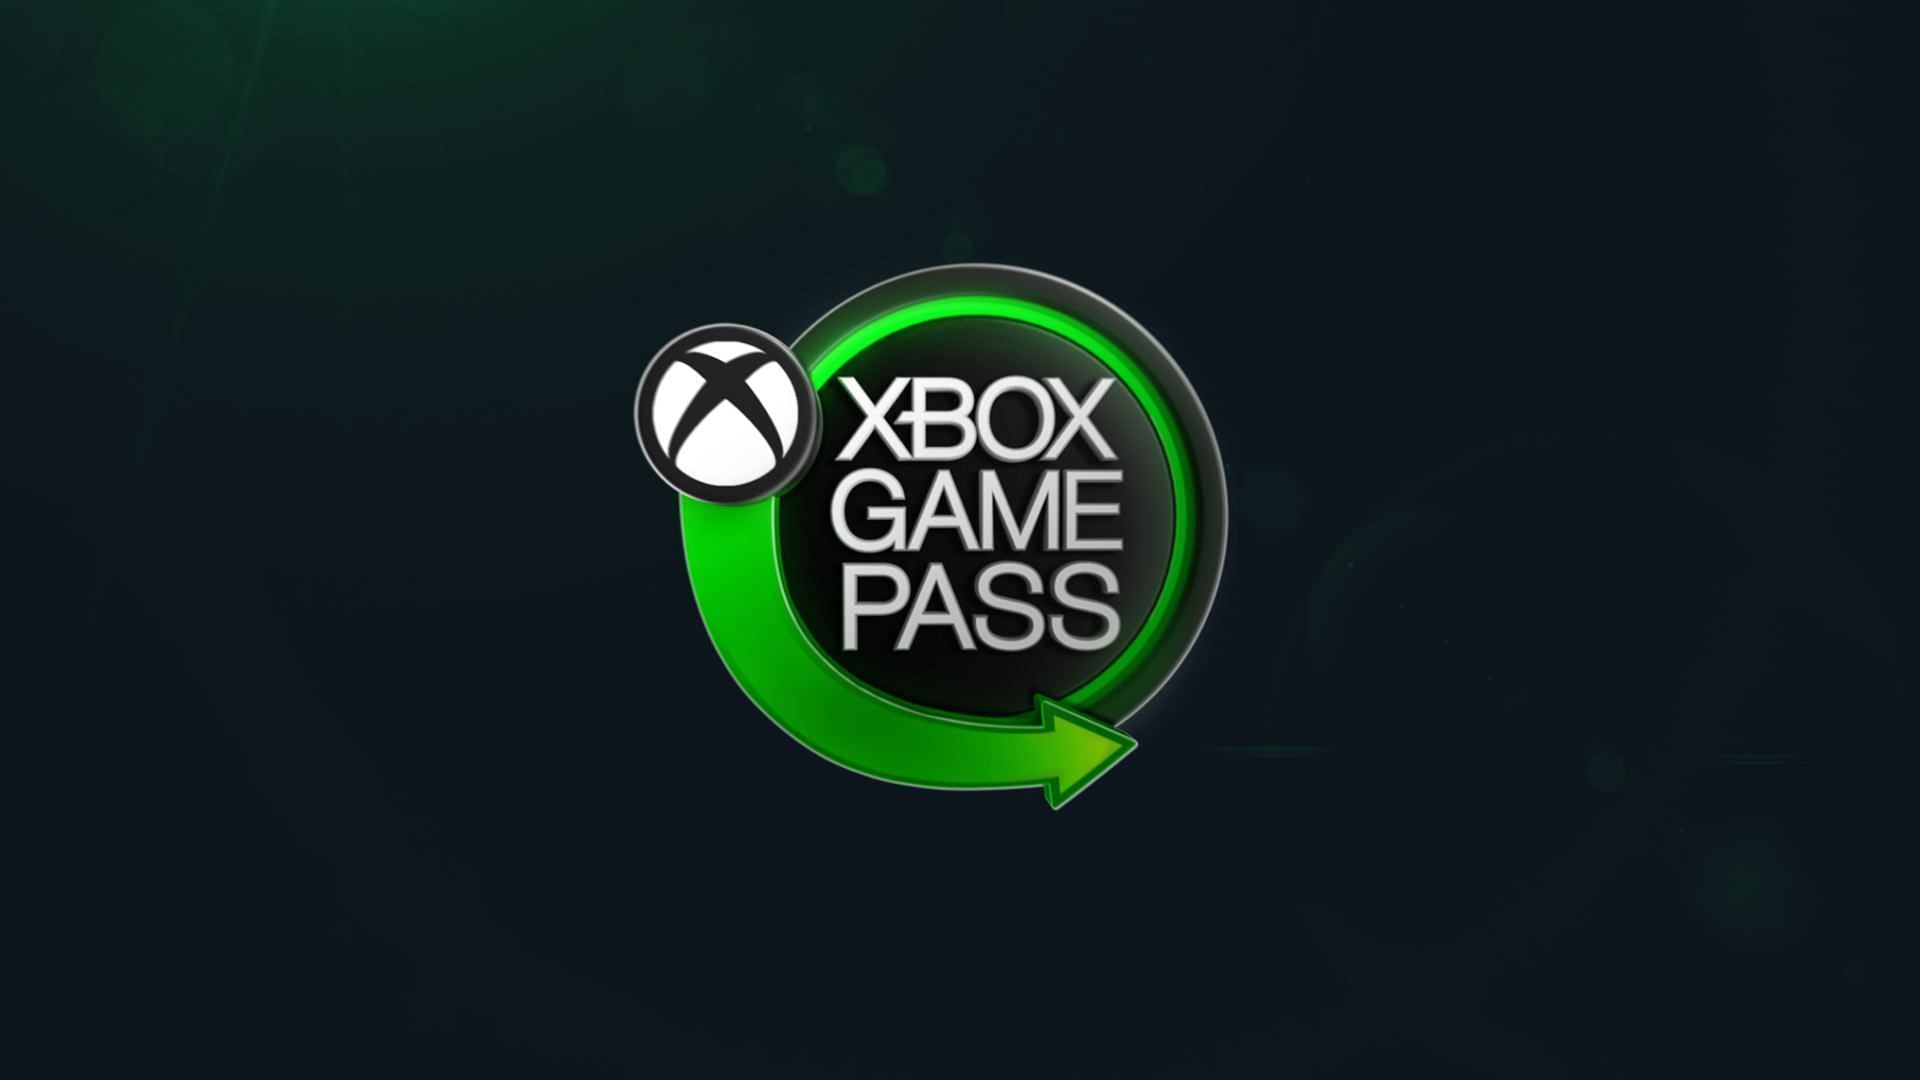 Top 5 RPG games to play in Xbox Game Pass (Image via Microsoft)